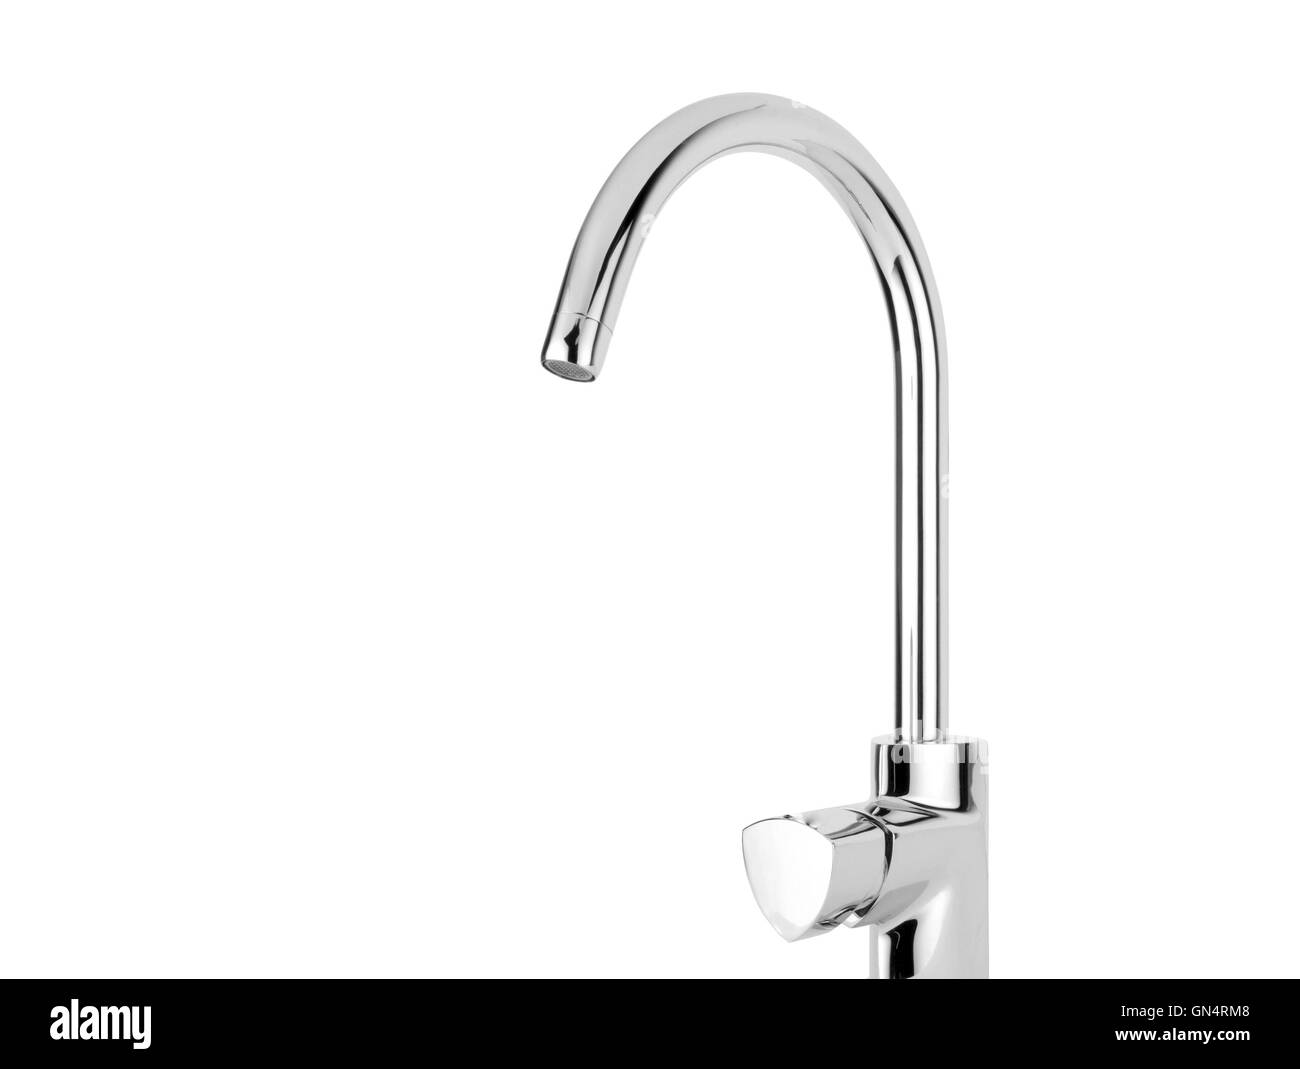 Modern stainless steel tap. Isolated on white background. Stock Photo